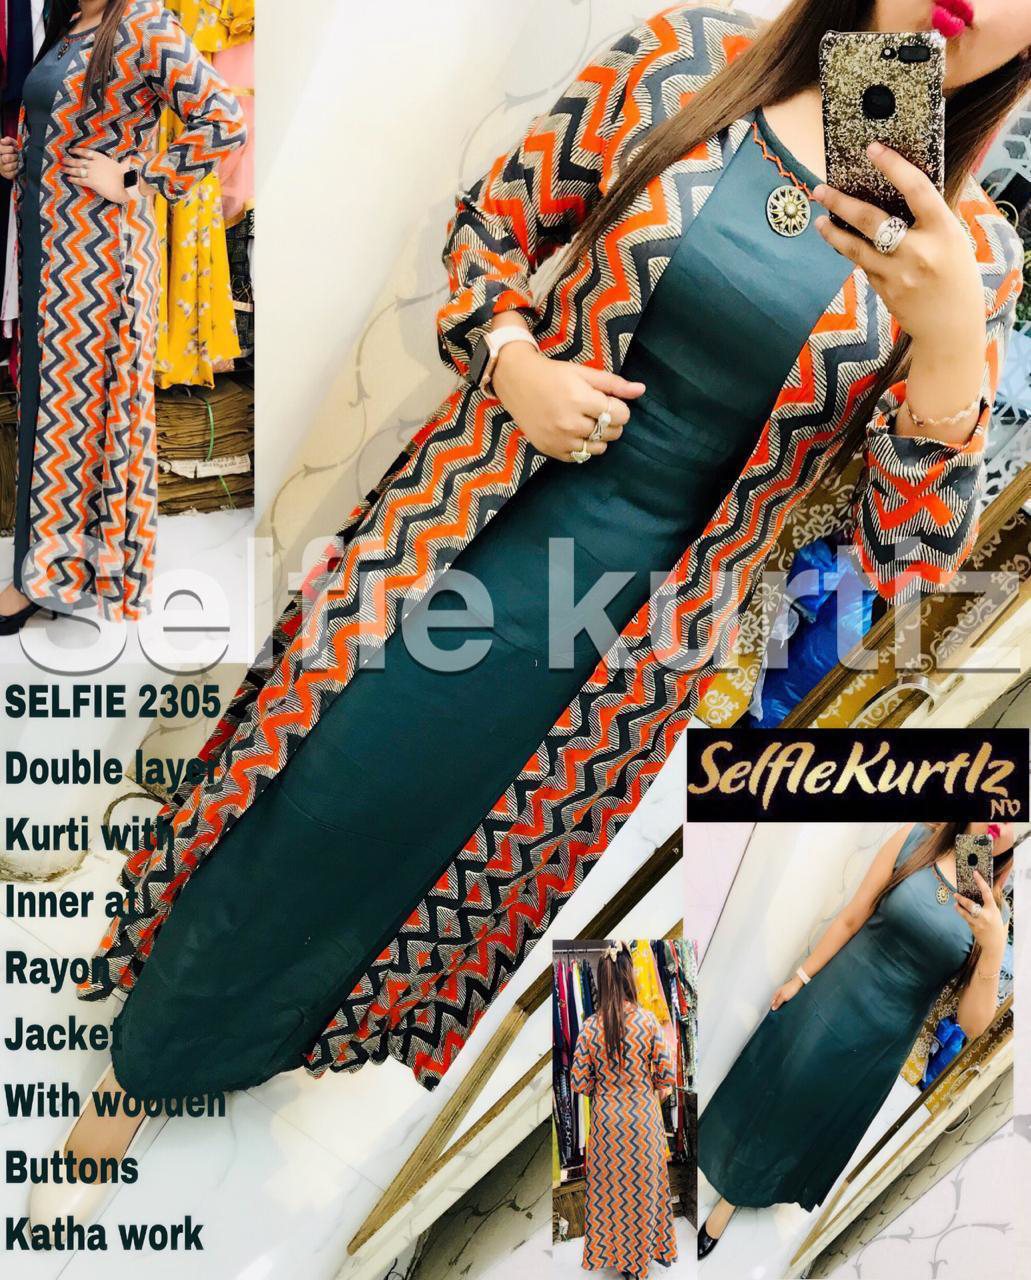 Buy Selfie Kurtis - Double Layer Kurti with Inner and Rayon Jacket with ...